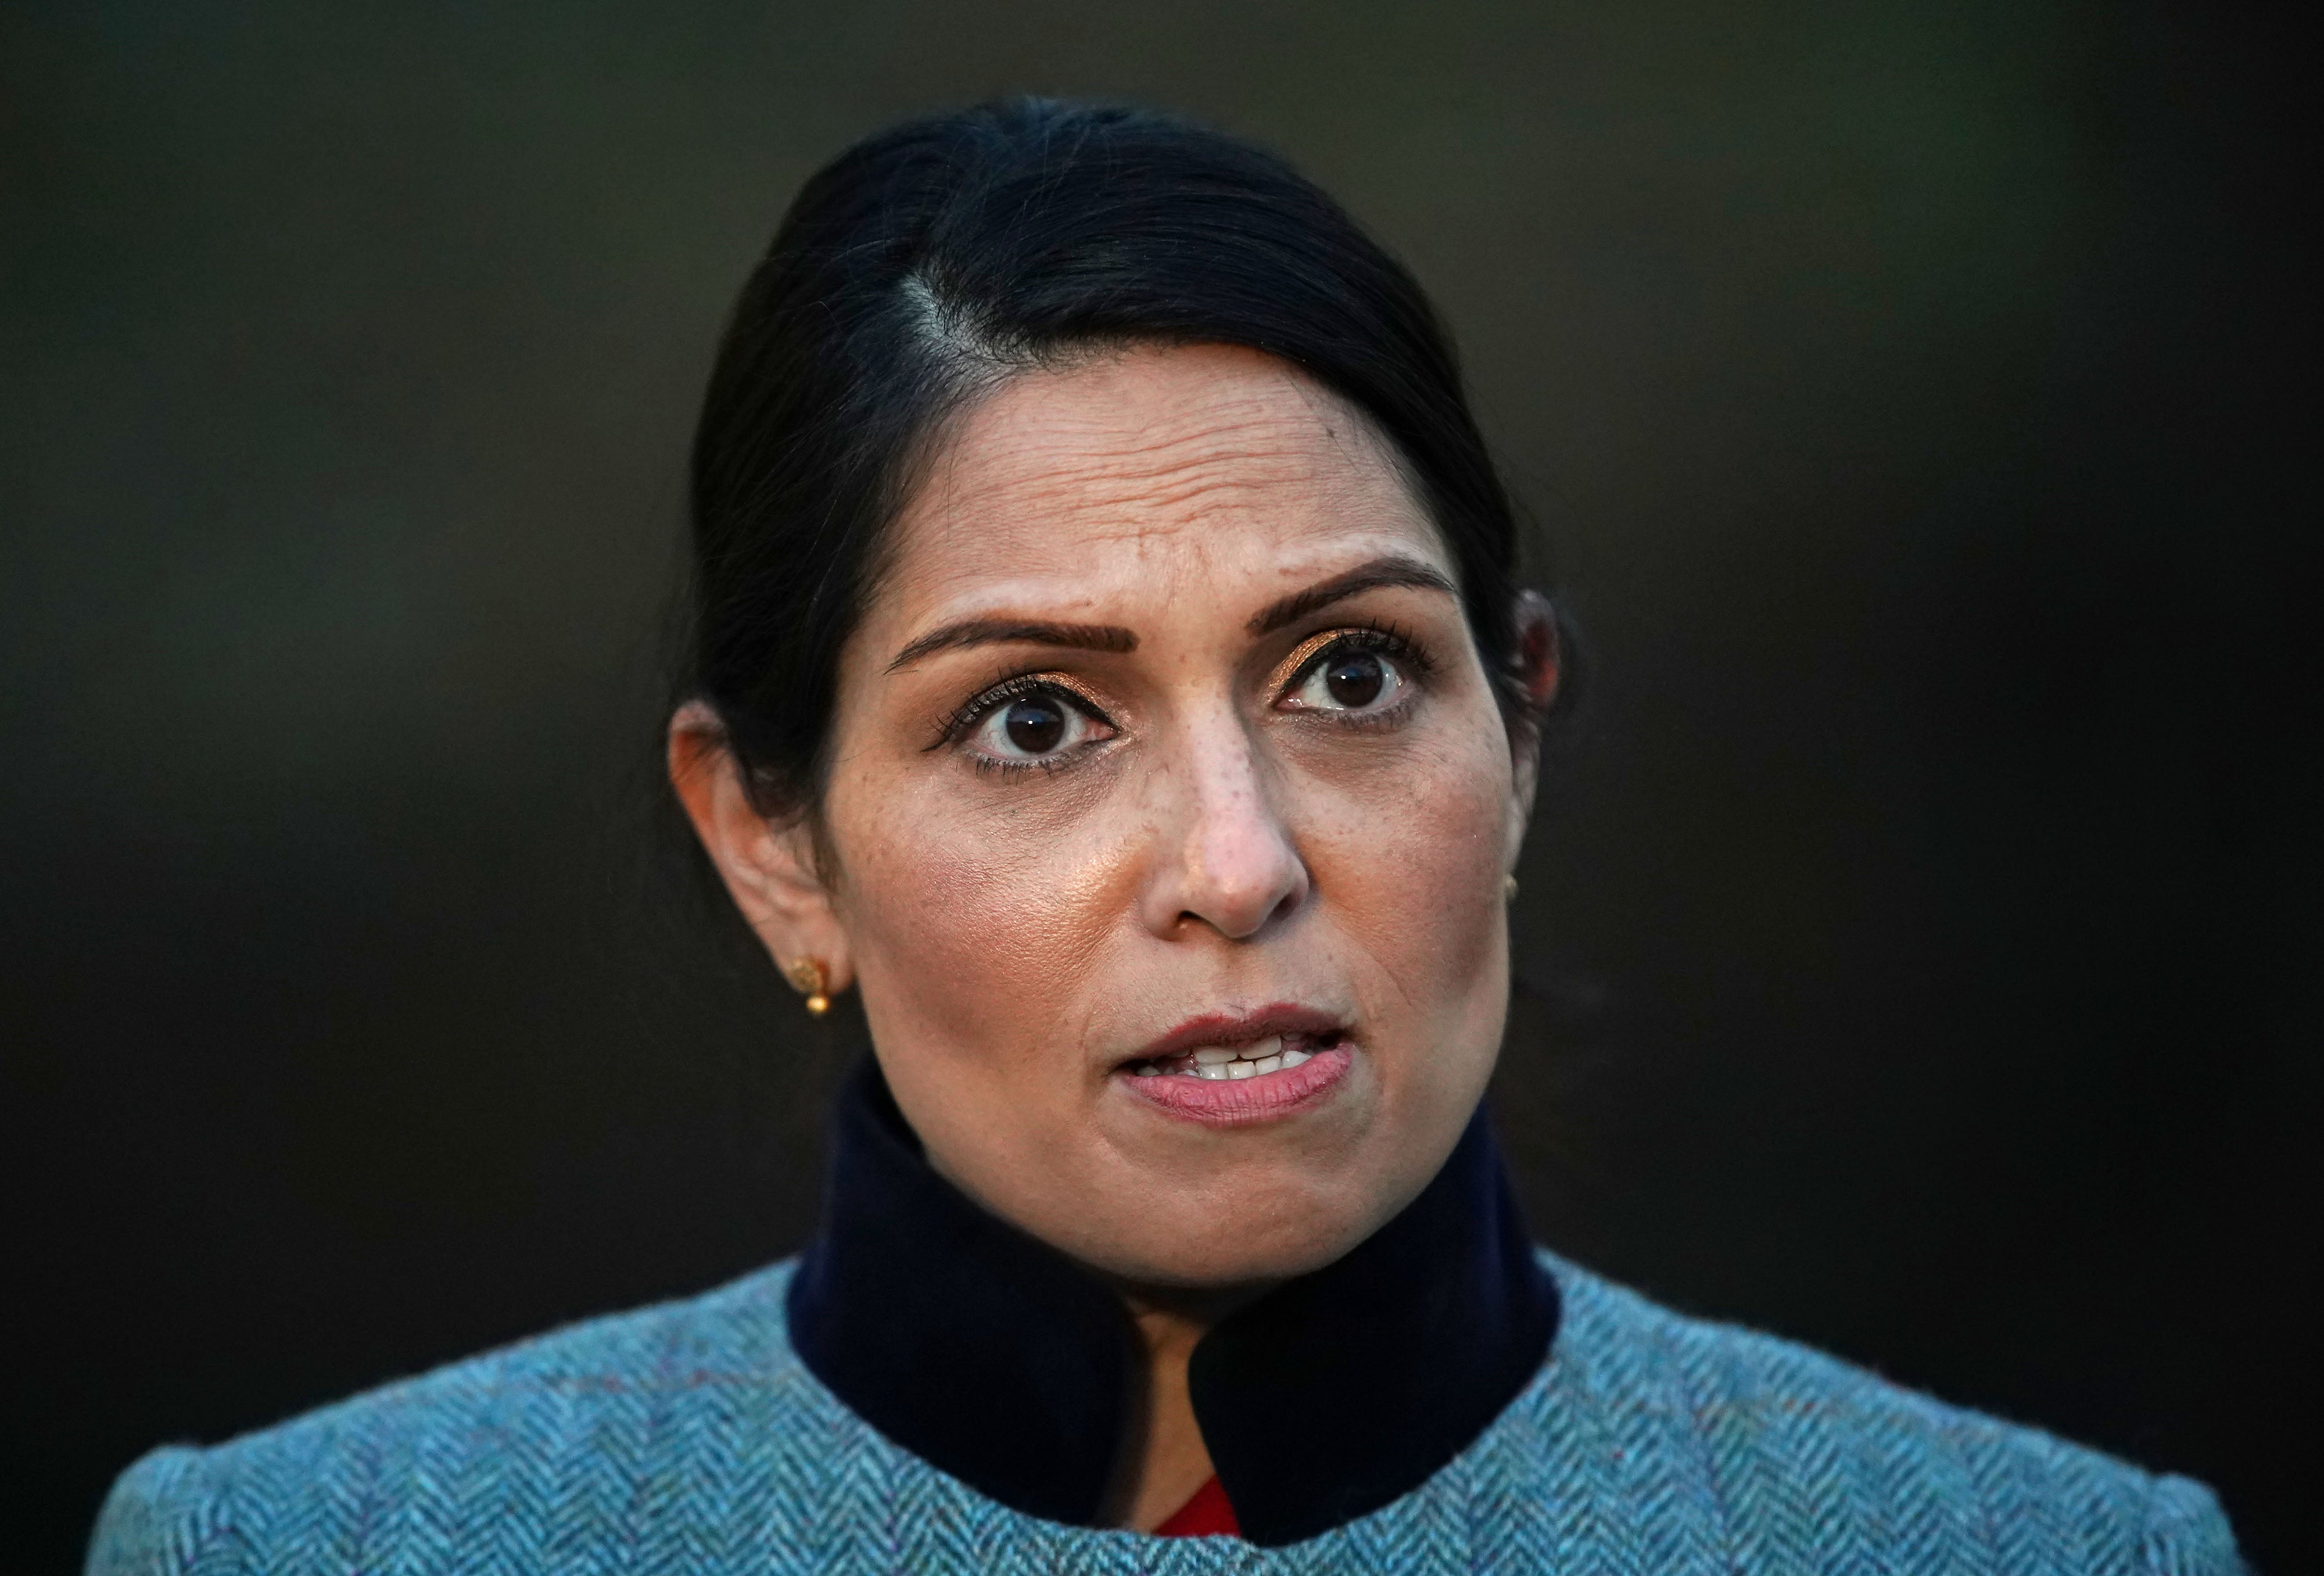 Home secretary Priti Patel has repeatedly vowed to crack down on migrant crossings